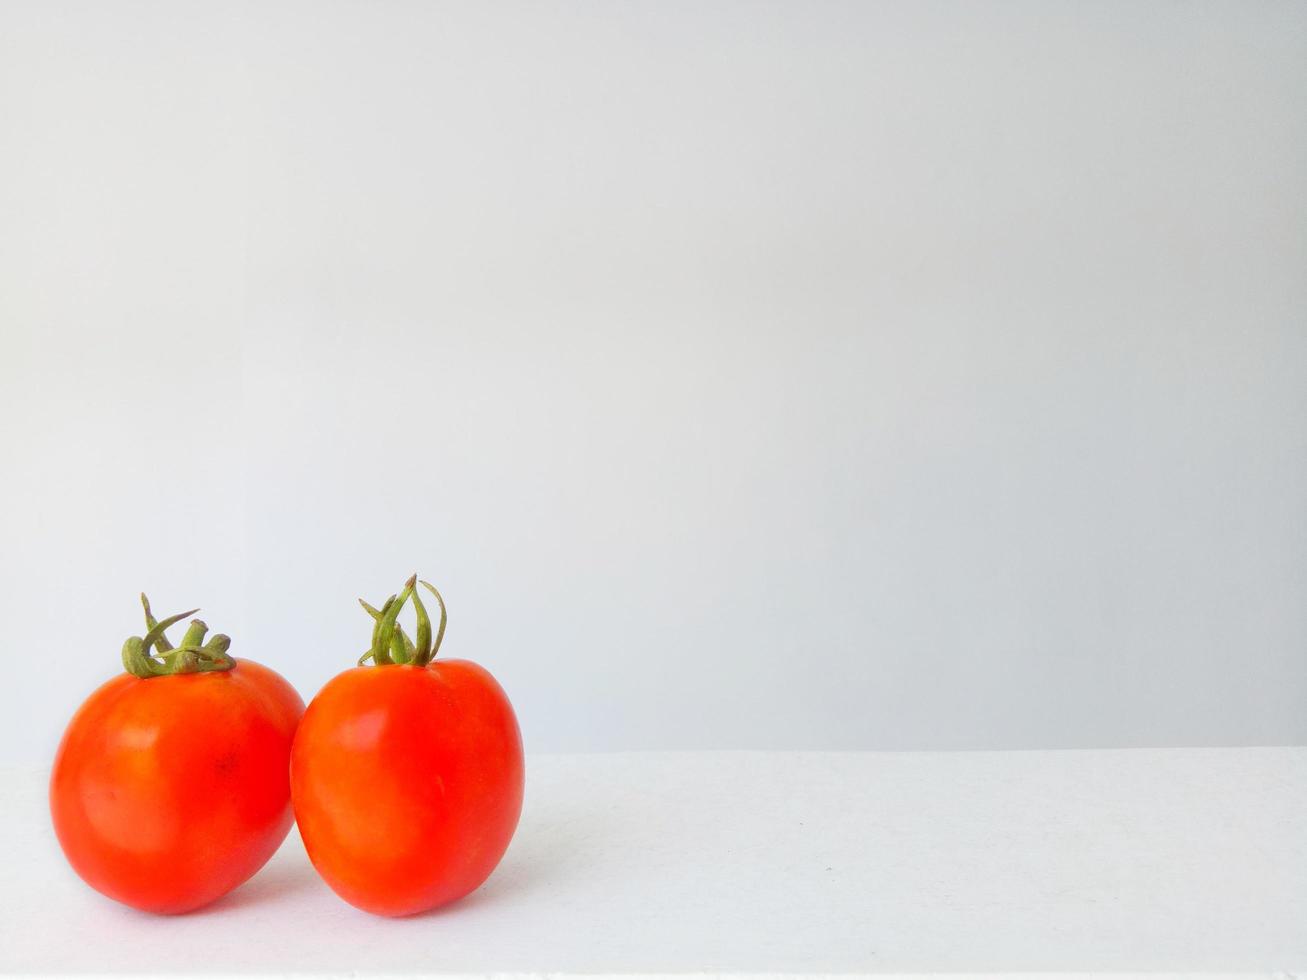 Close-up photo of two red tomatoes on a white background